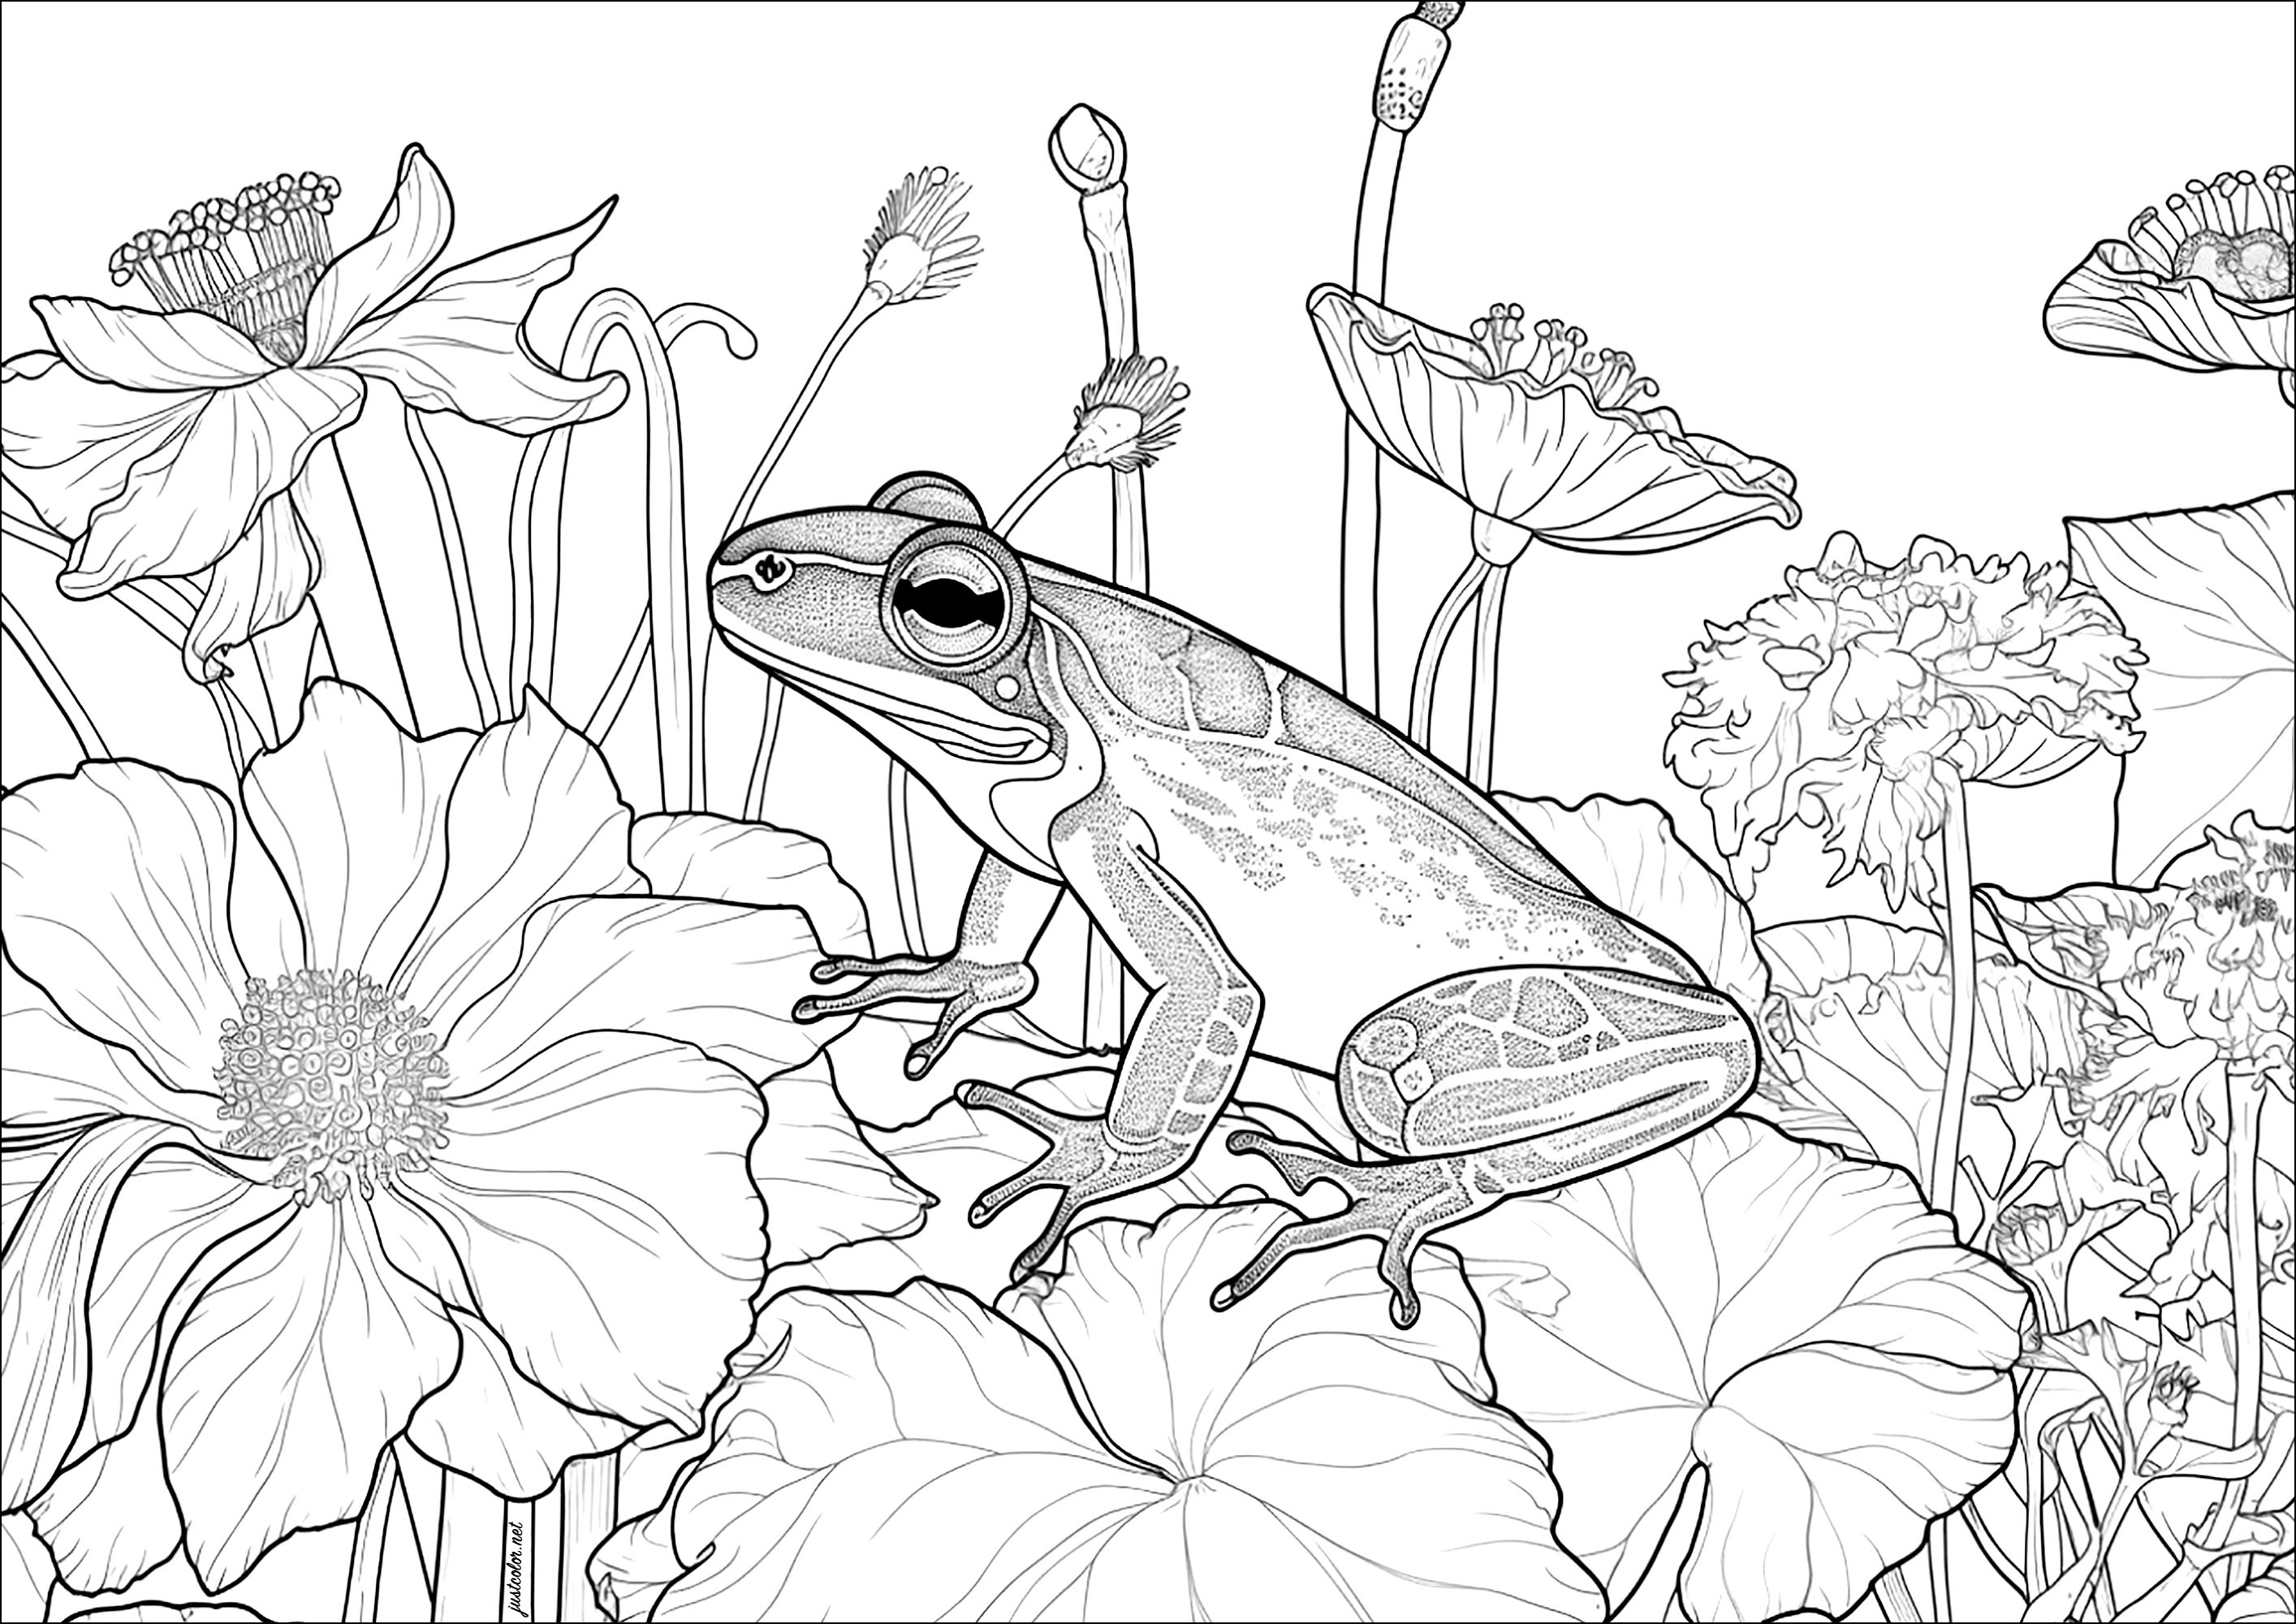 Beautiful frog on flowers. This relaxing coloring page is easy to do because the flowers are large and well-defined.